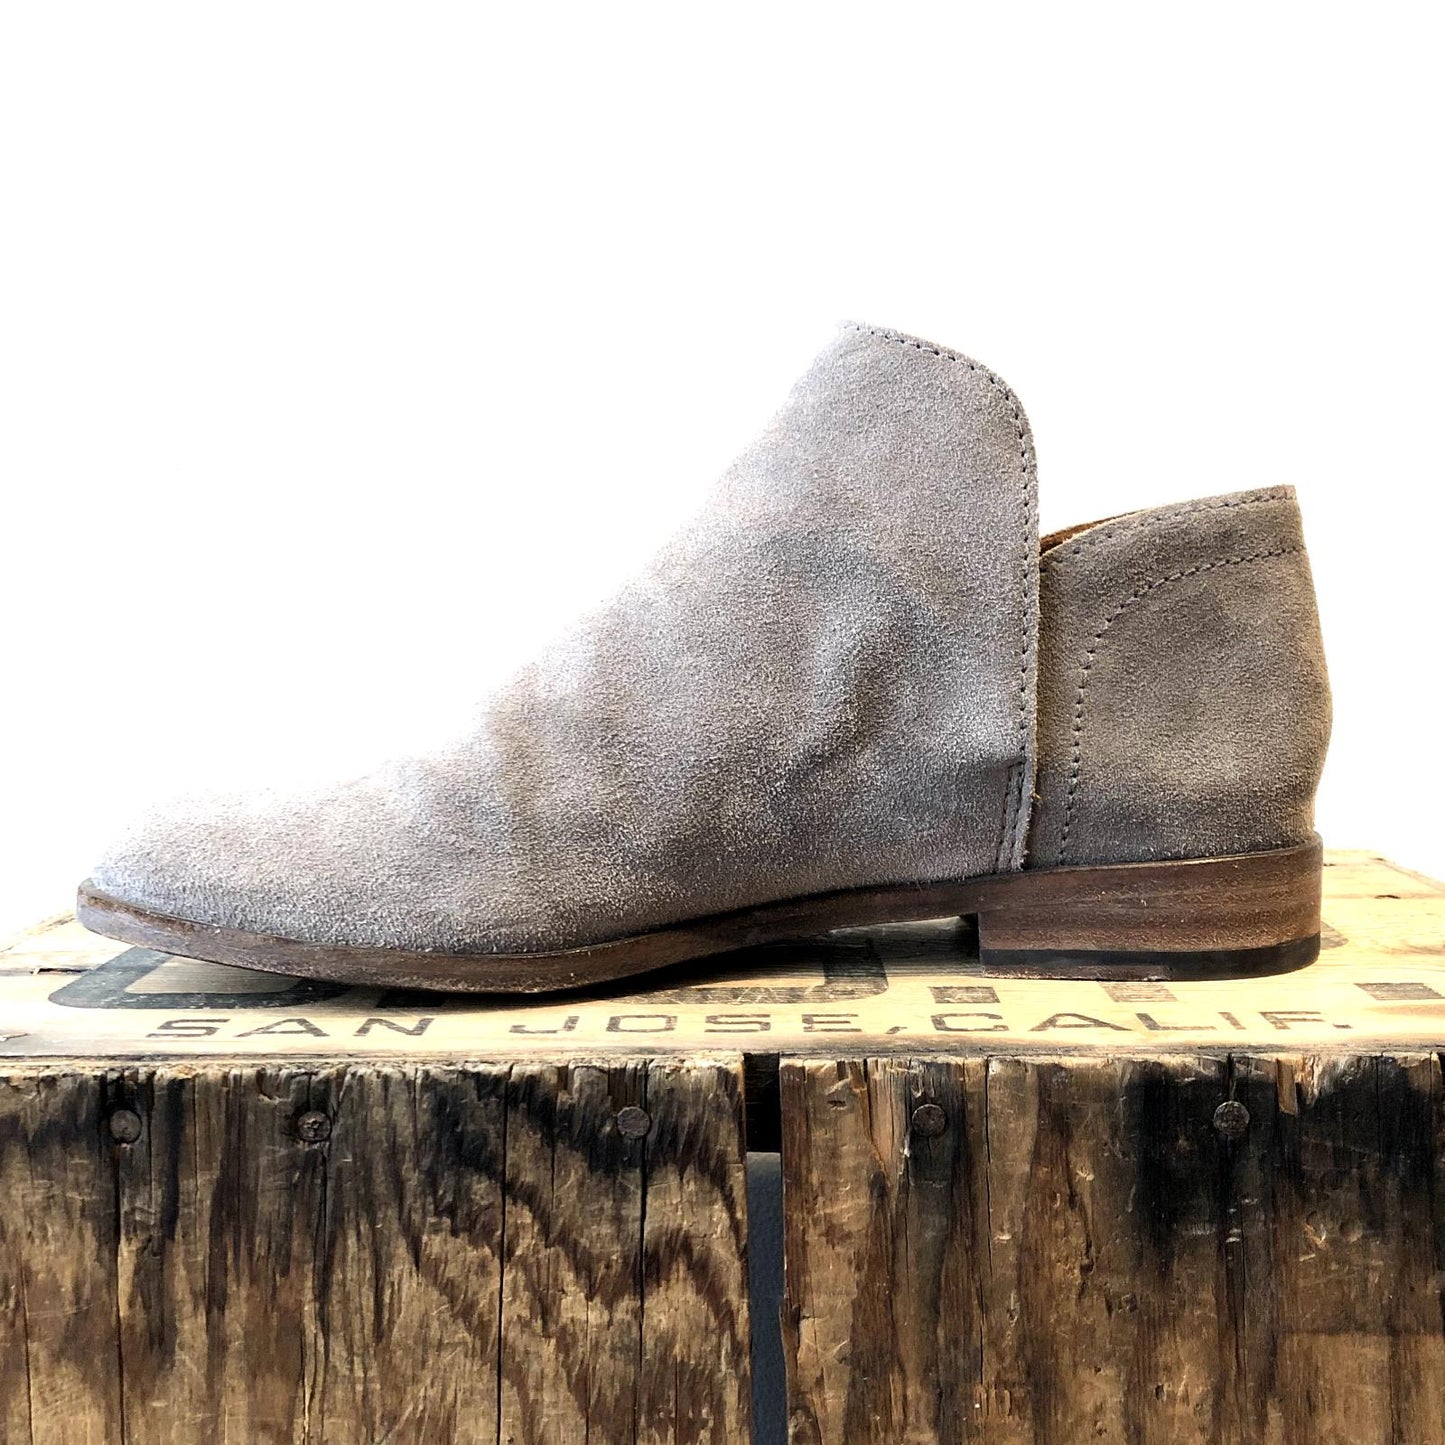 8.5 - Frye Gray Suede Leather Elyssa Slip On Ankle Boots Booties 1130TS